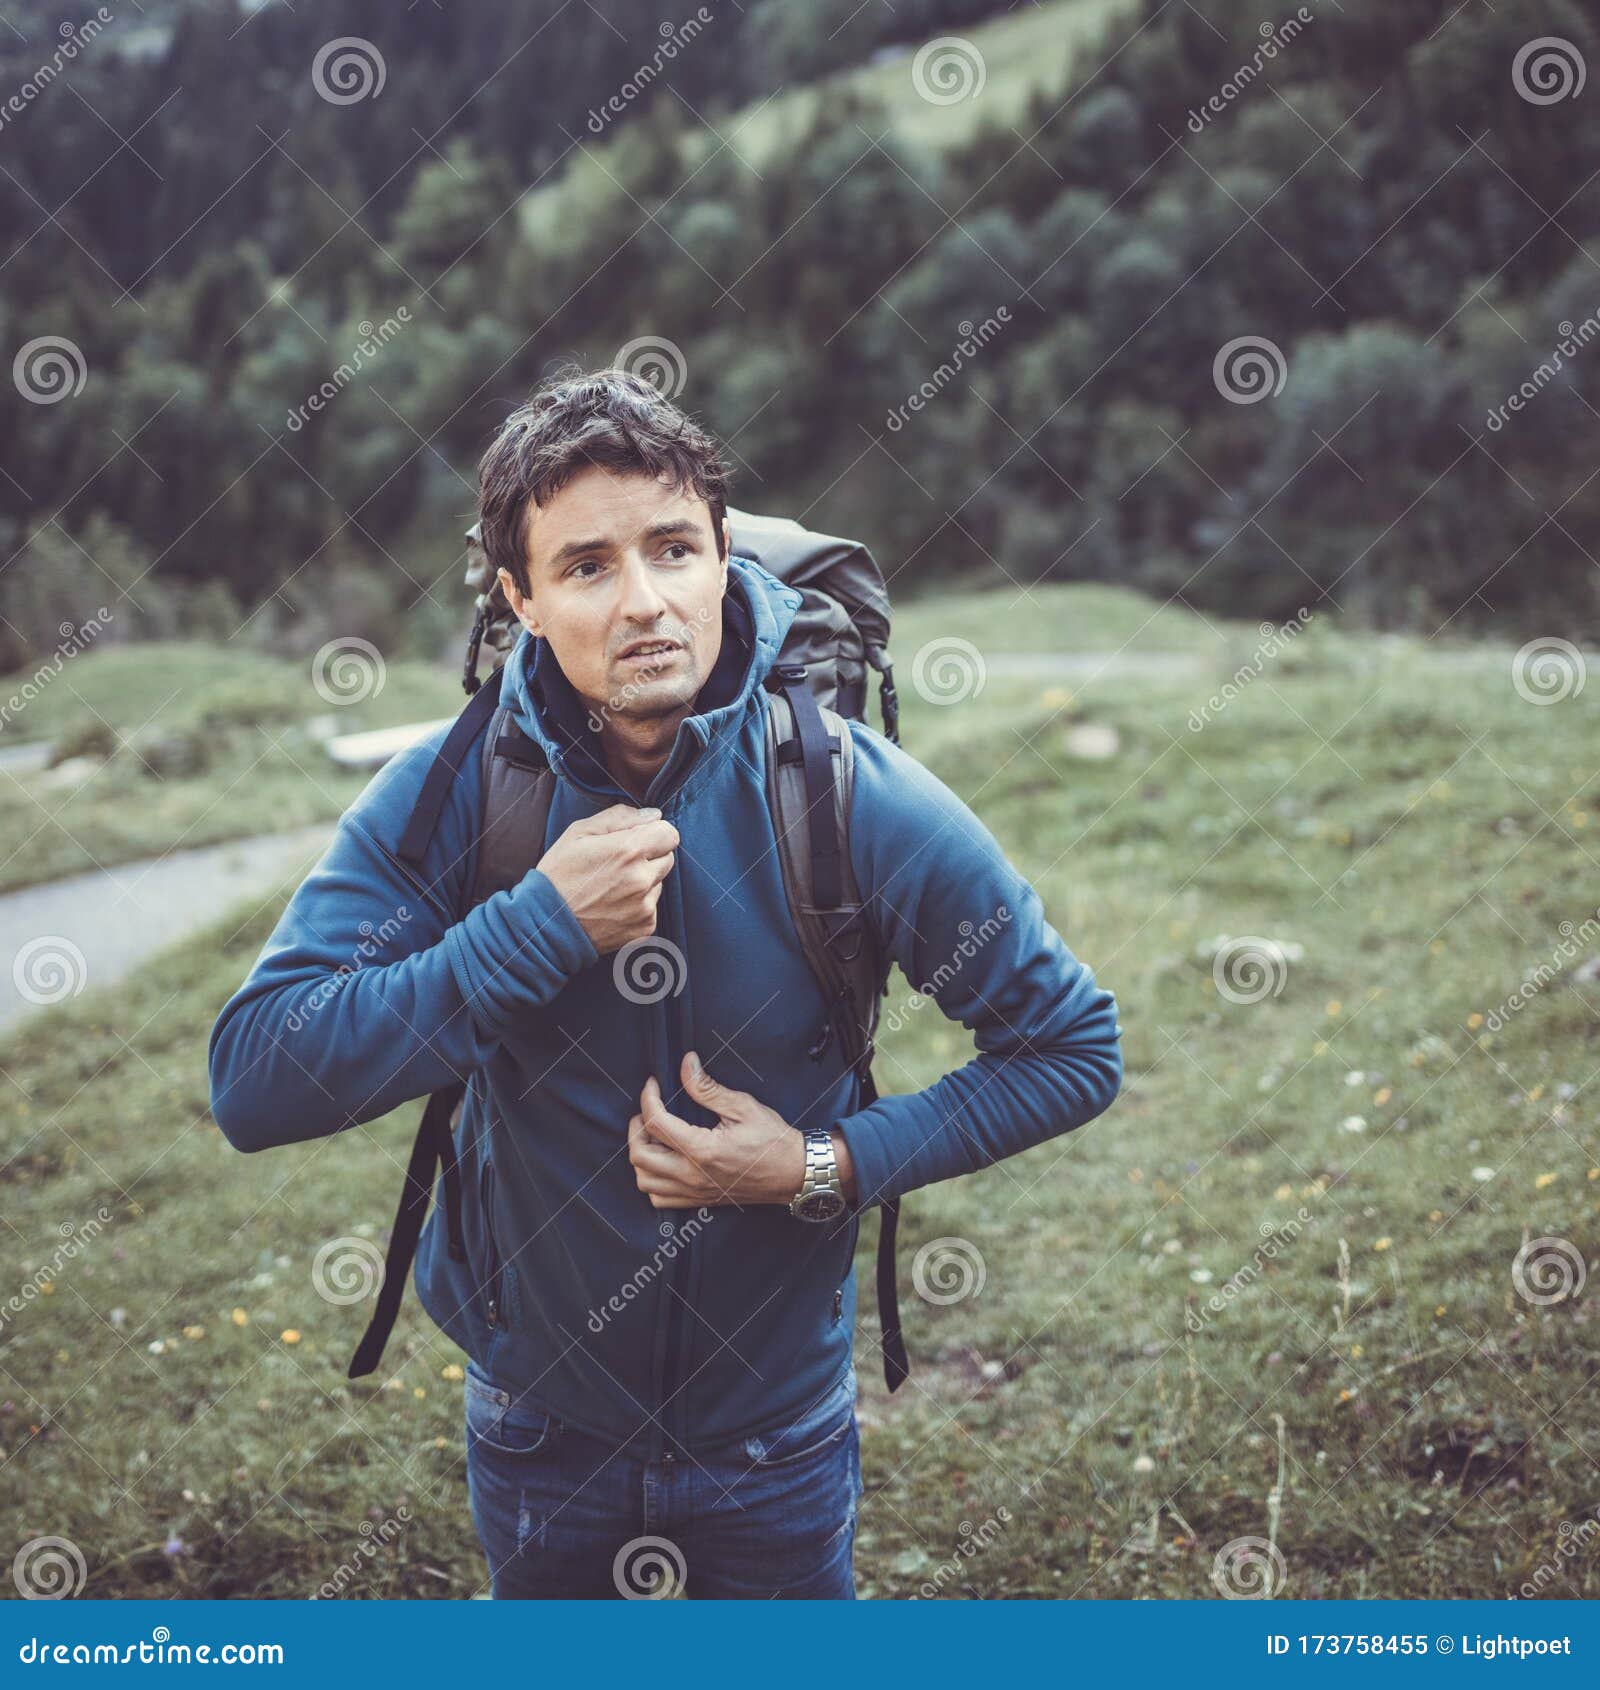 young man in the mountains during an outdoor advernture